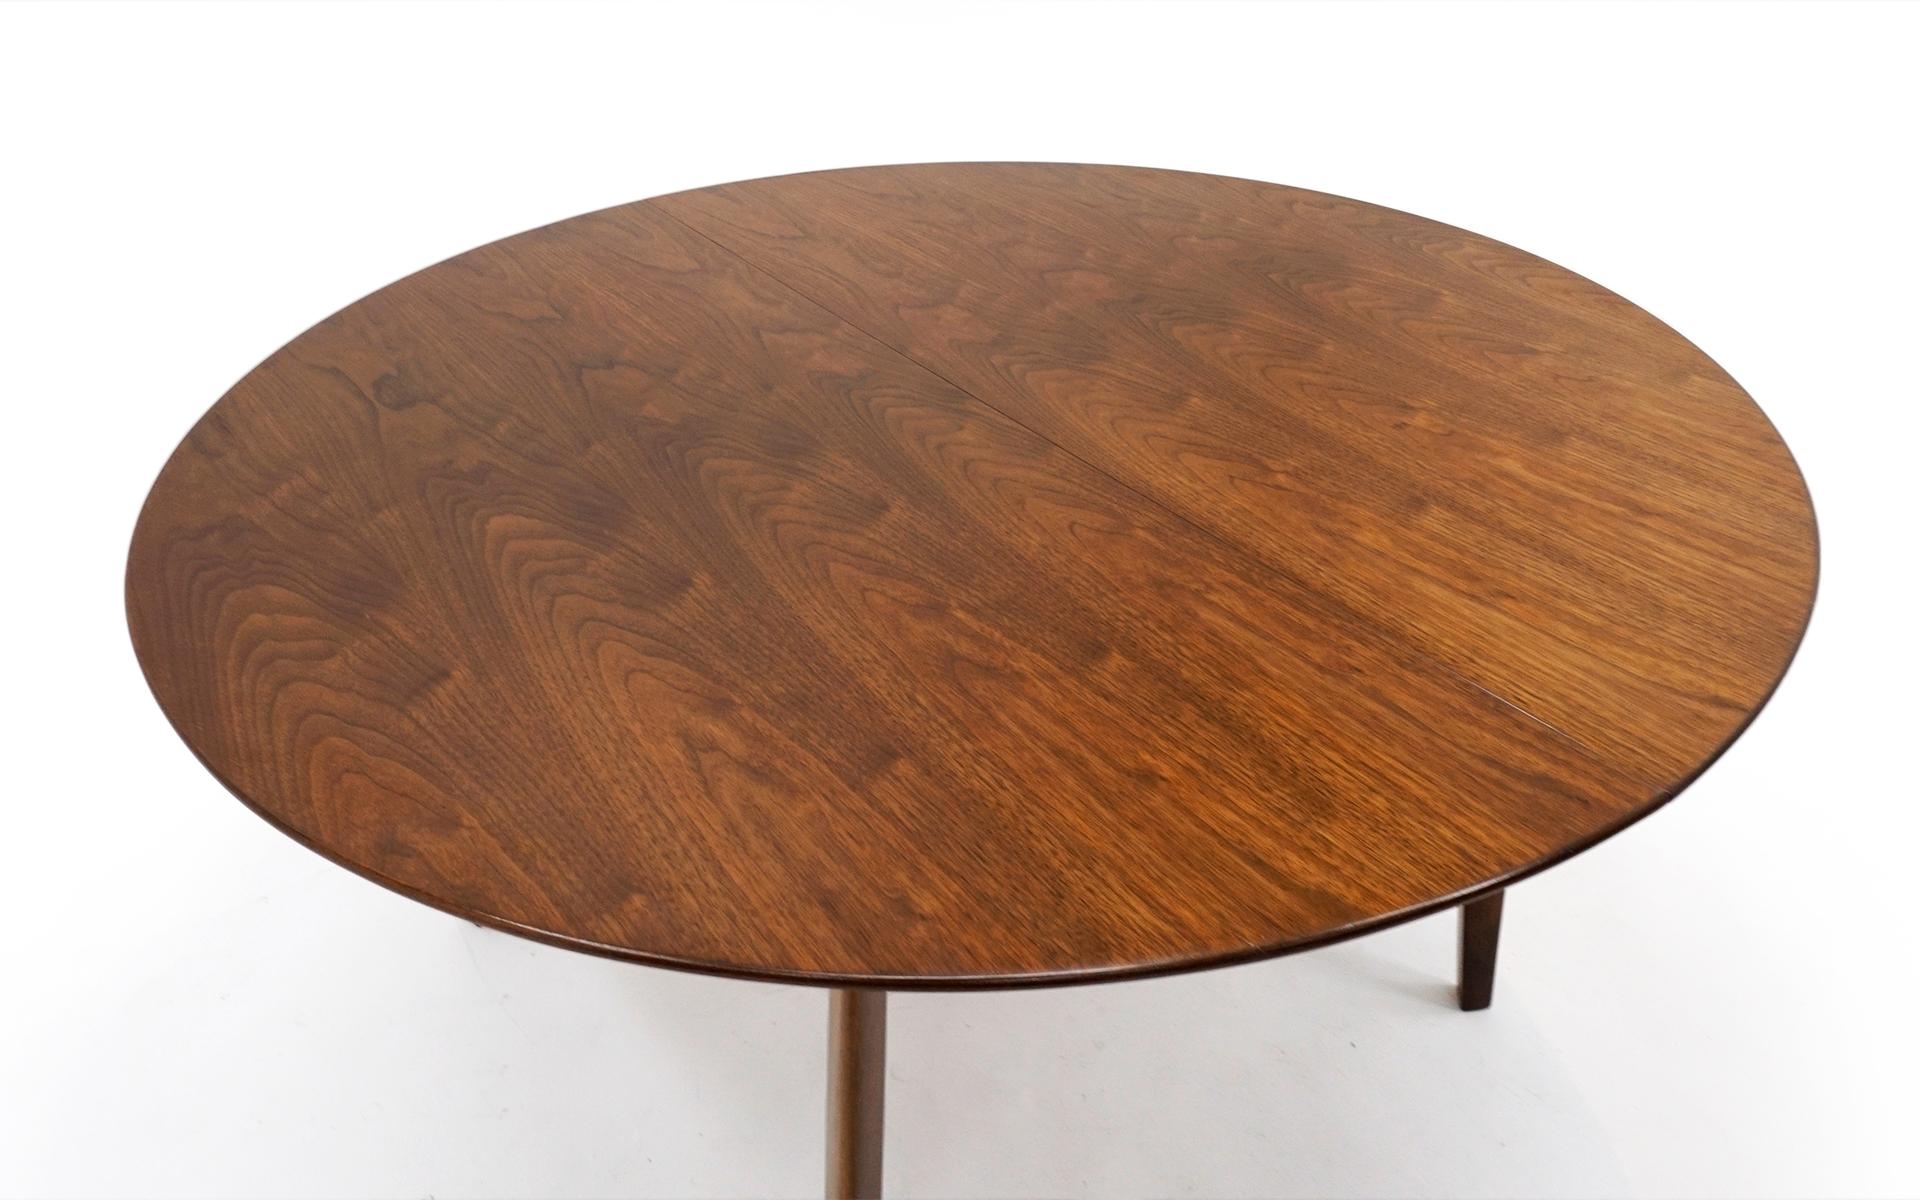 Mid-Century Modern Expandable Dining Table by Edward Wormley for Dunbar, Almost Round to Oval